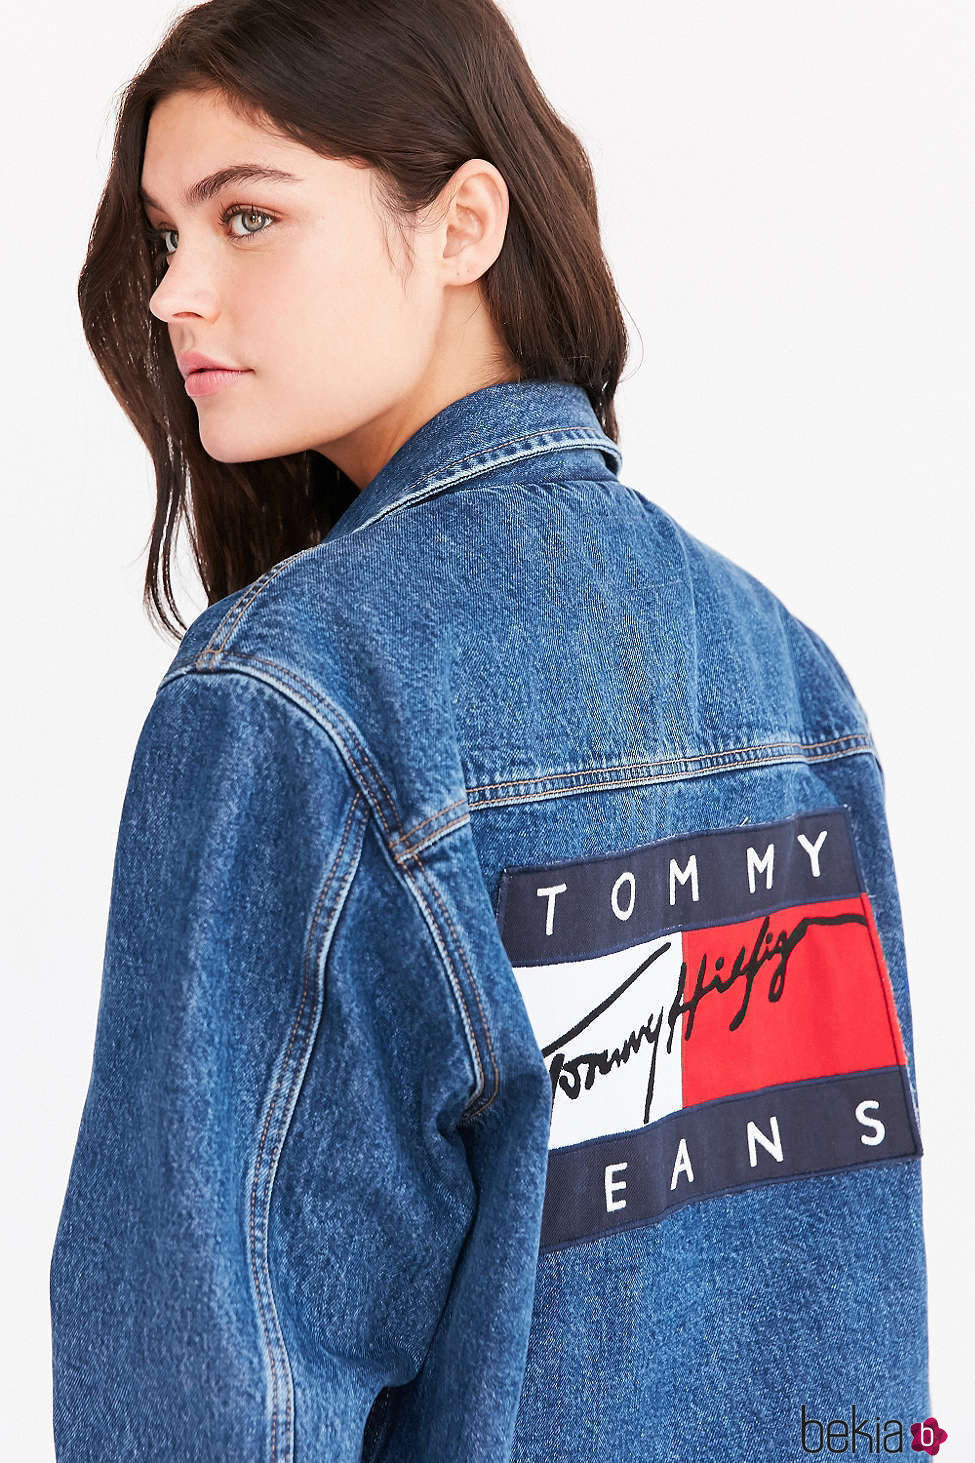 Chaqueta vaquera de Tommy Jeans para Urban Outfitters